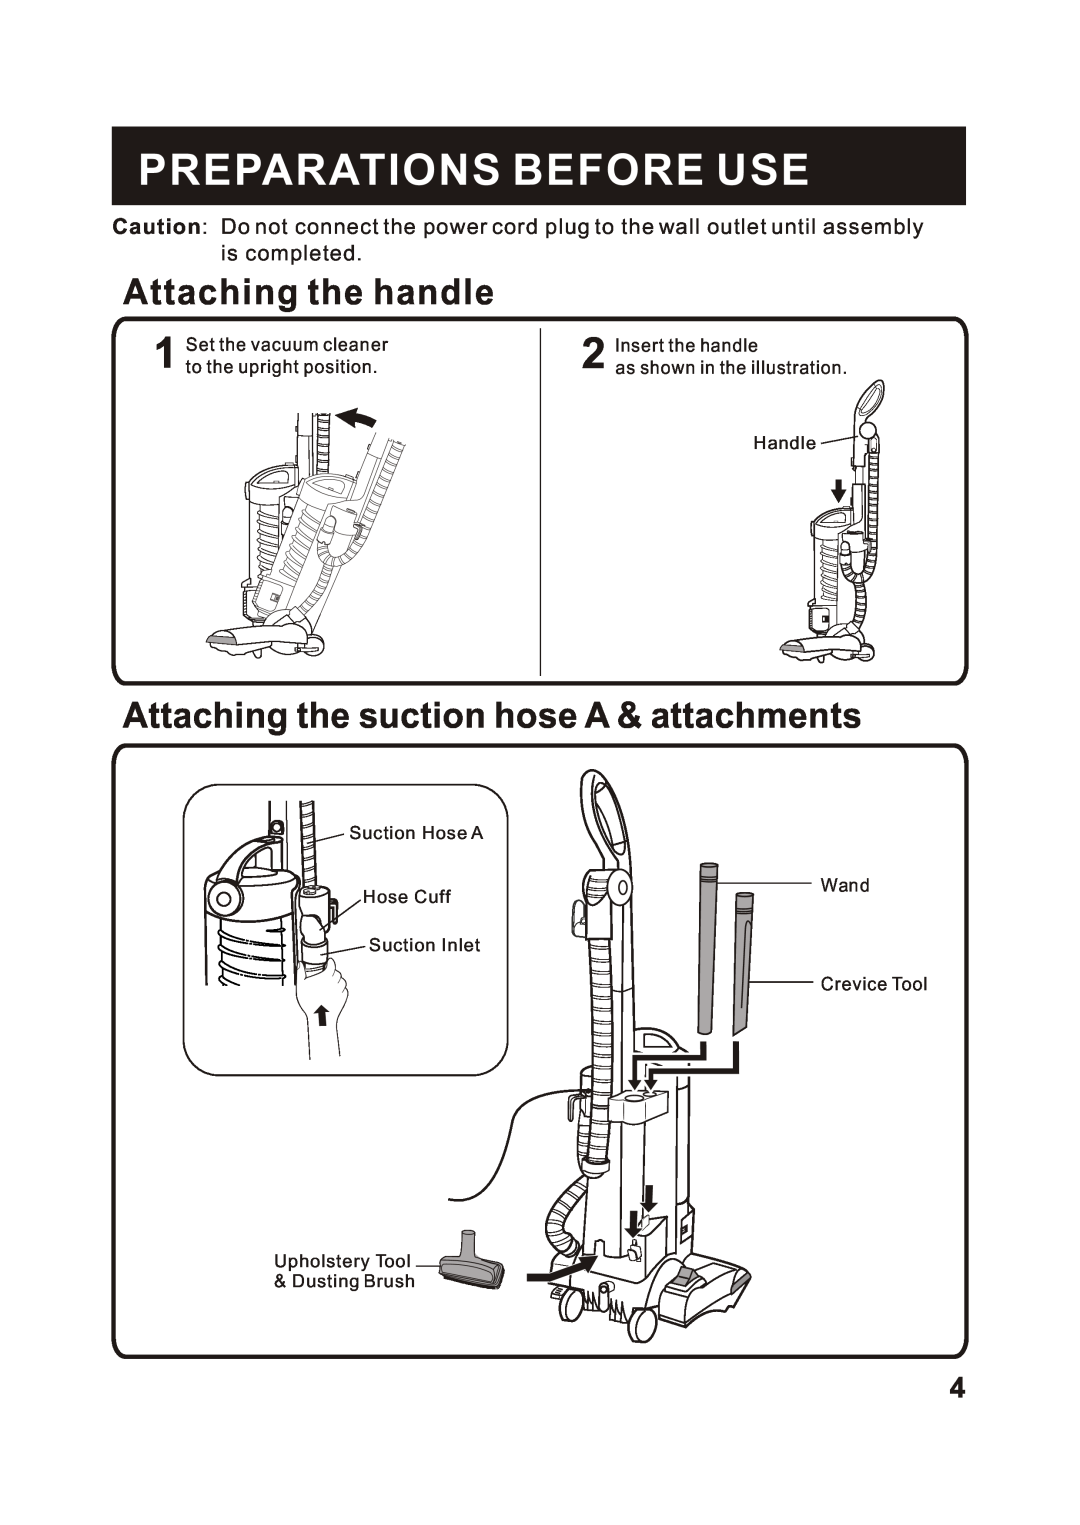 Fantom Vacuum FM741B Preparations Before Use, Attaching the handle, Attaching the suction hose A & attachments 